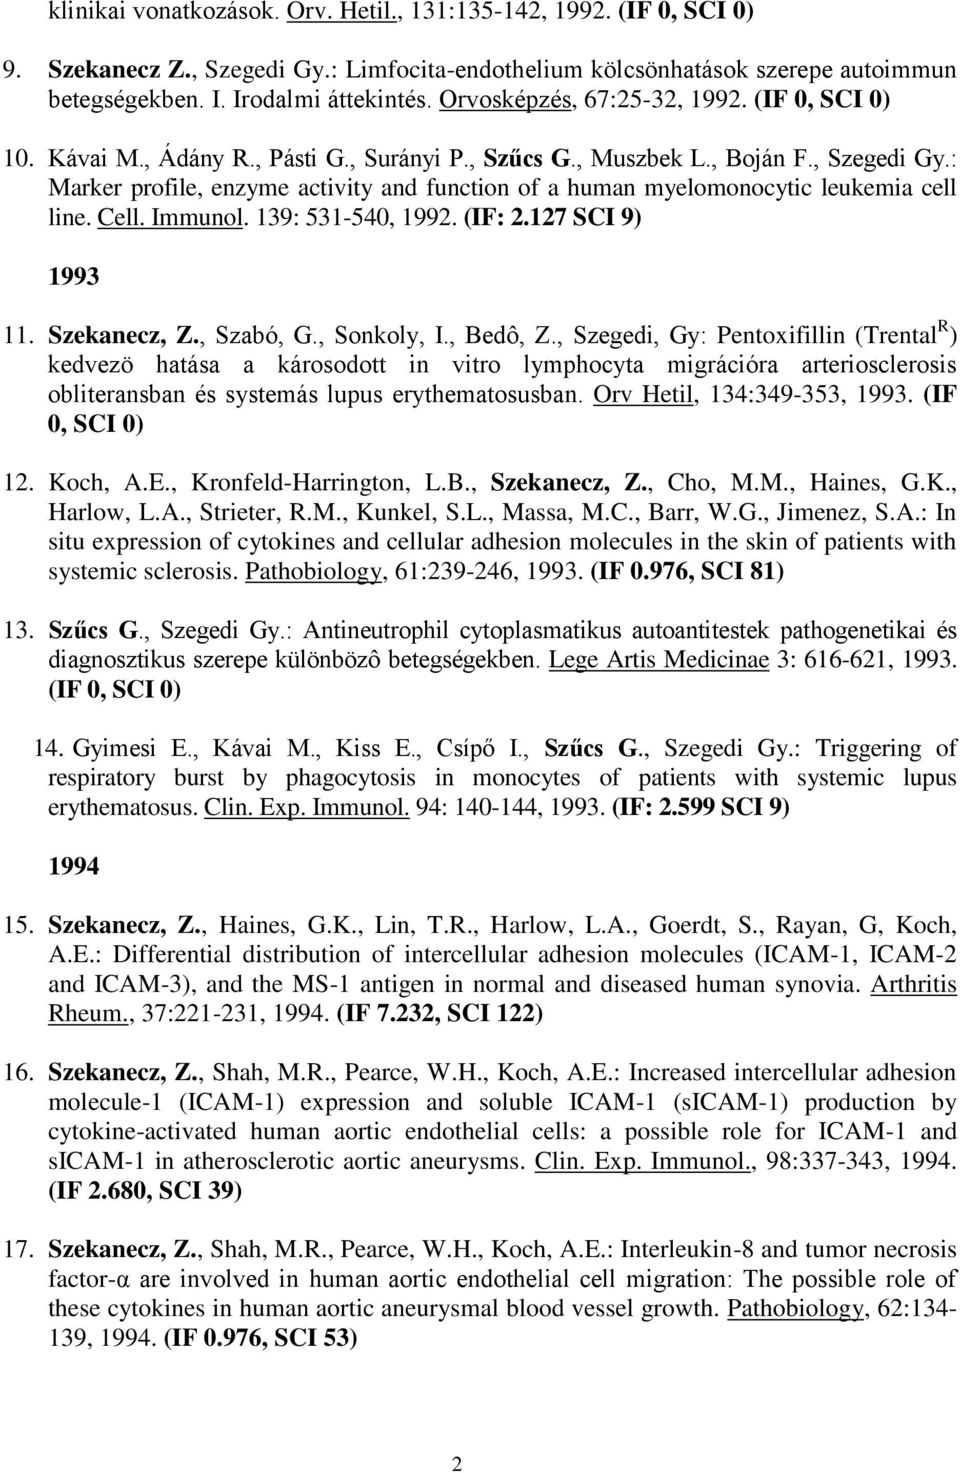 : Marker profile, enzyme activity and function of a human myelomonocytic leukemia cell line. Cell. Immunol. 139: 531-540, 1992. (IF: 2.127 SCI 9) 1993 11. Szekanecz, Z., Szabó, G., Sonkoly, I.